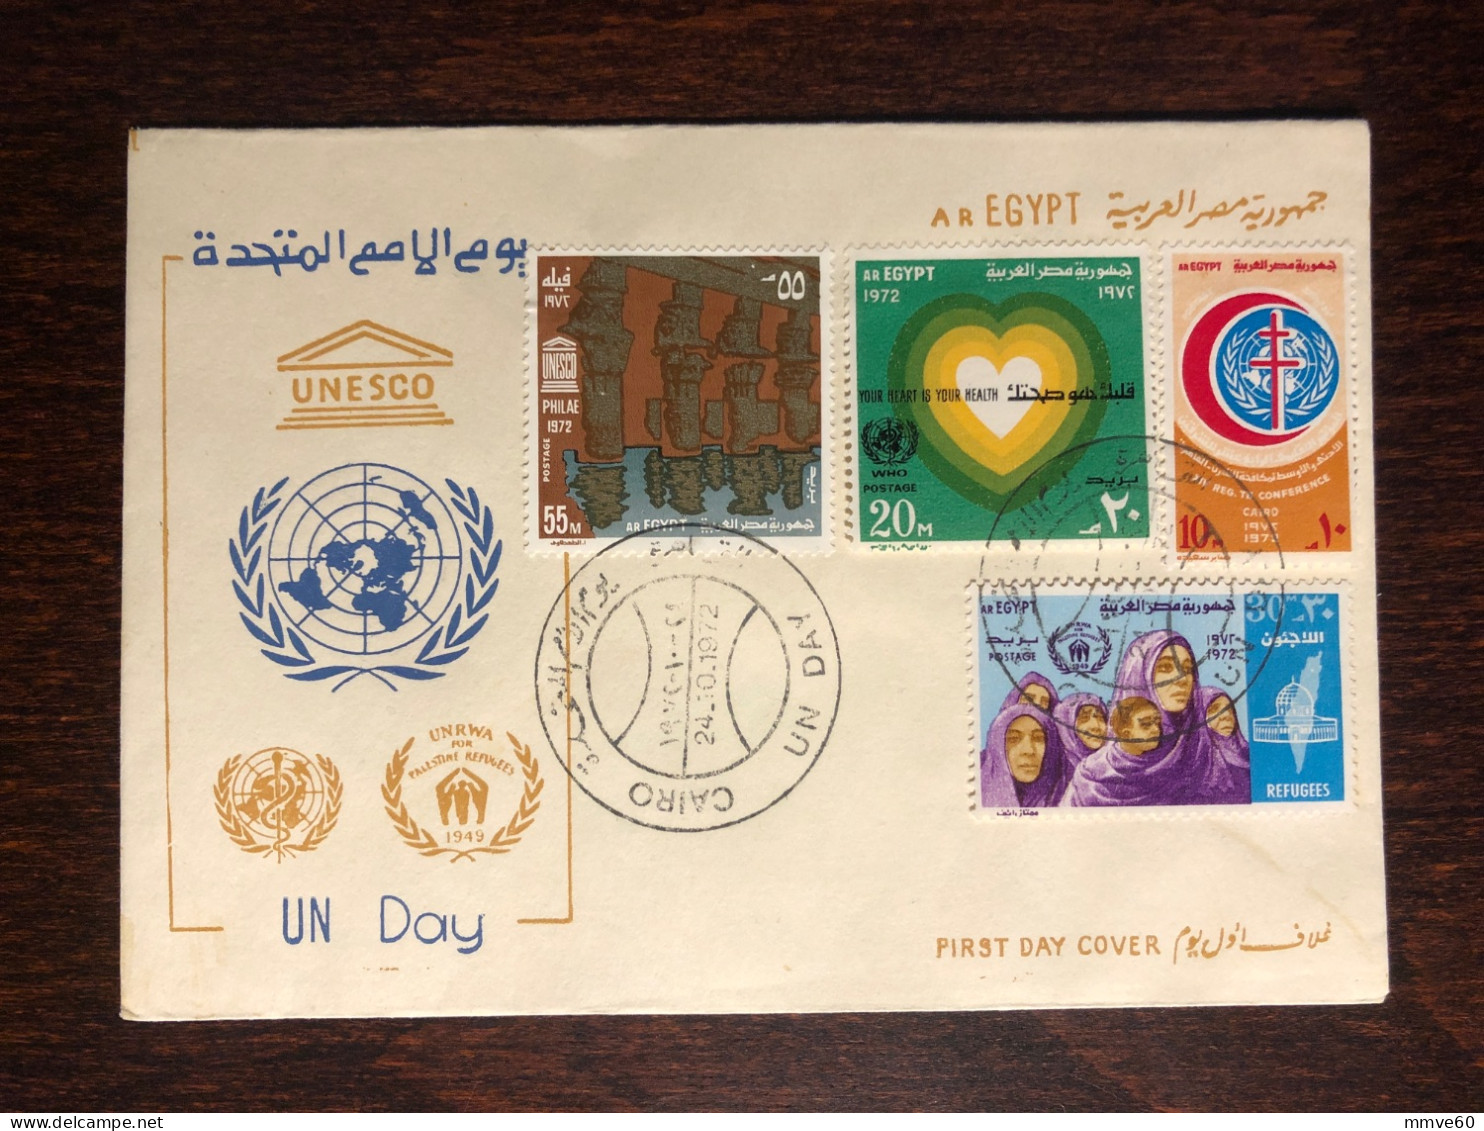 EGYPT FDC COVER 1972 YEAR TUBERCULOSIS TBC HEART CARDIOLOGY RED CRESCENT HEALTH MEDICINE - Covers & Documents